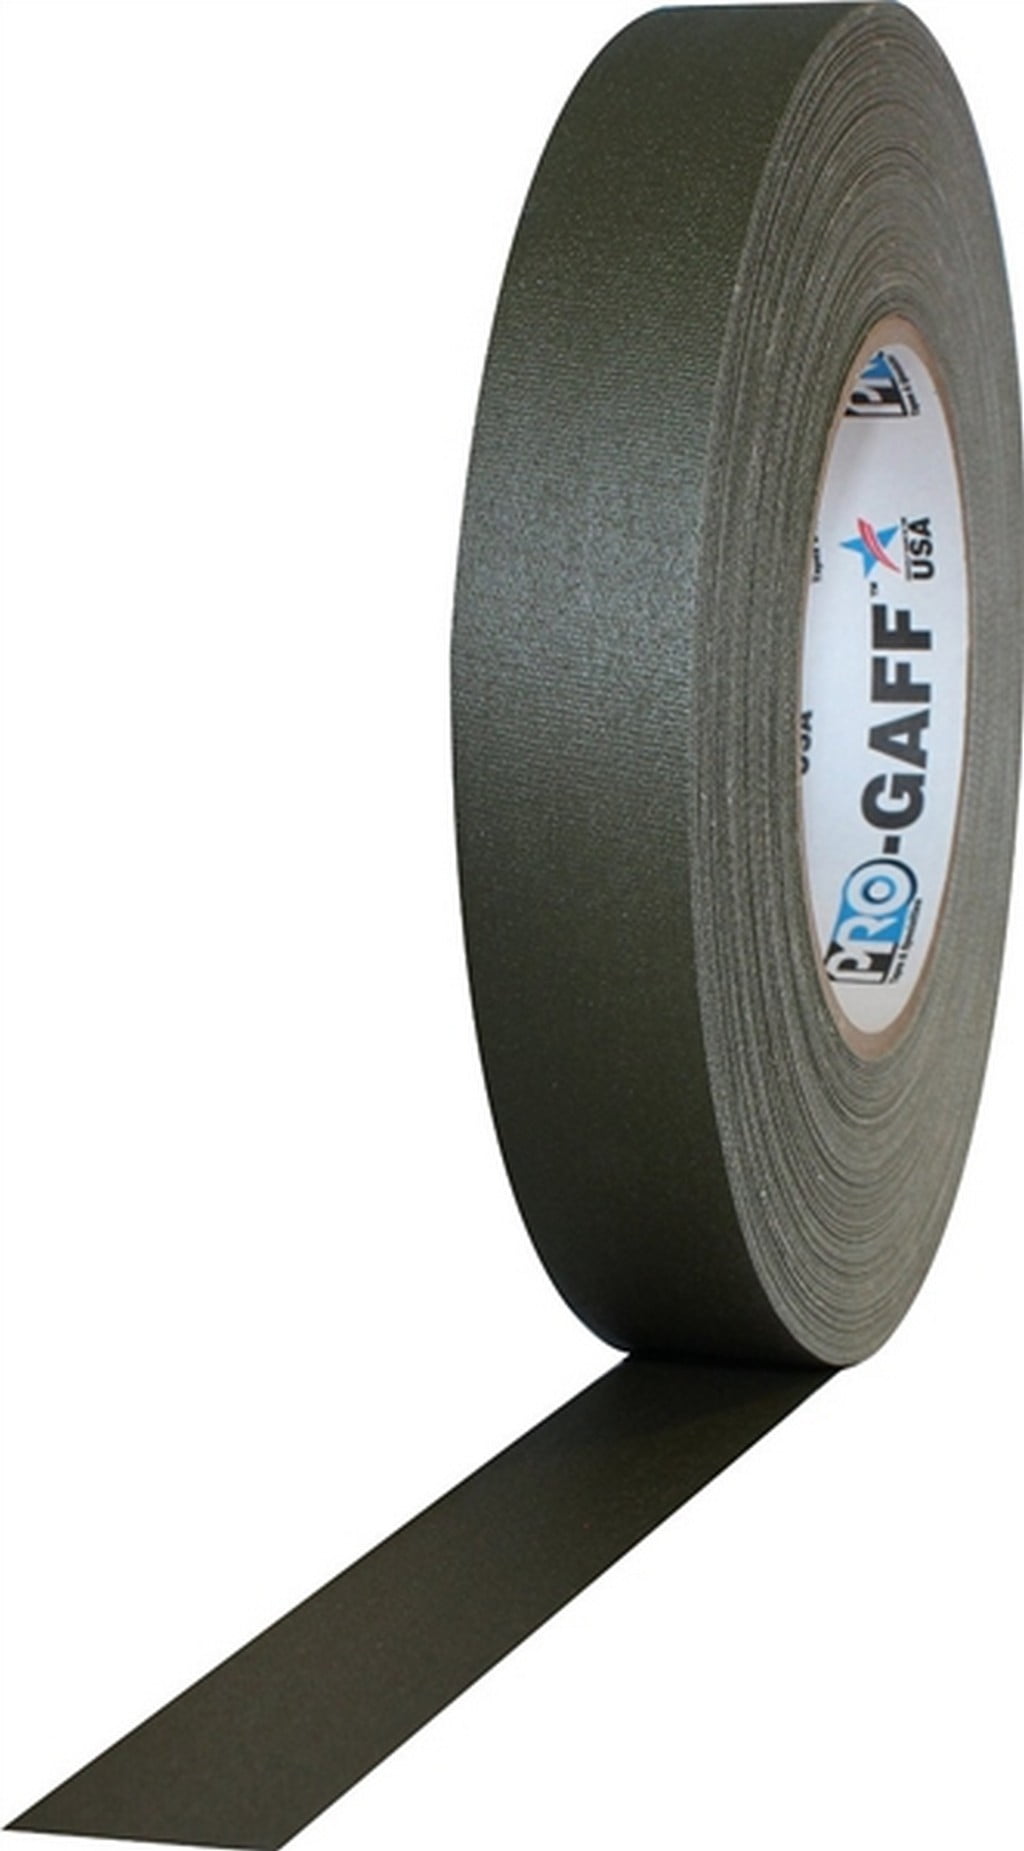 Pro Gaff Gaffers Tape 1 and 2 inch widths, 17 colors available, 1